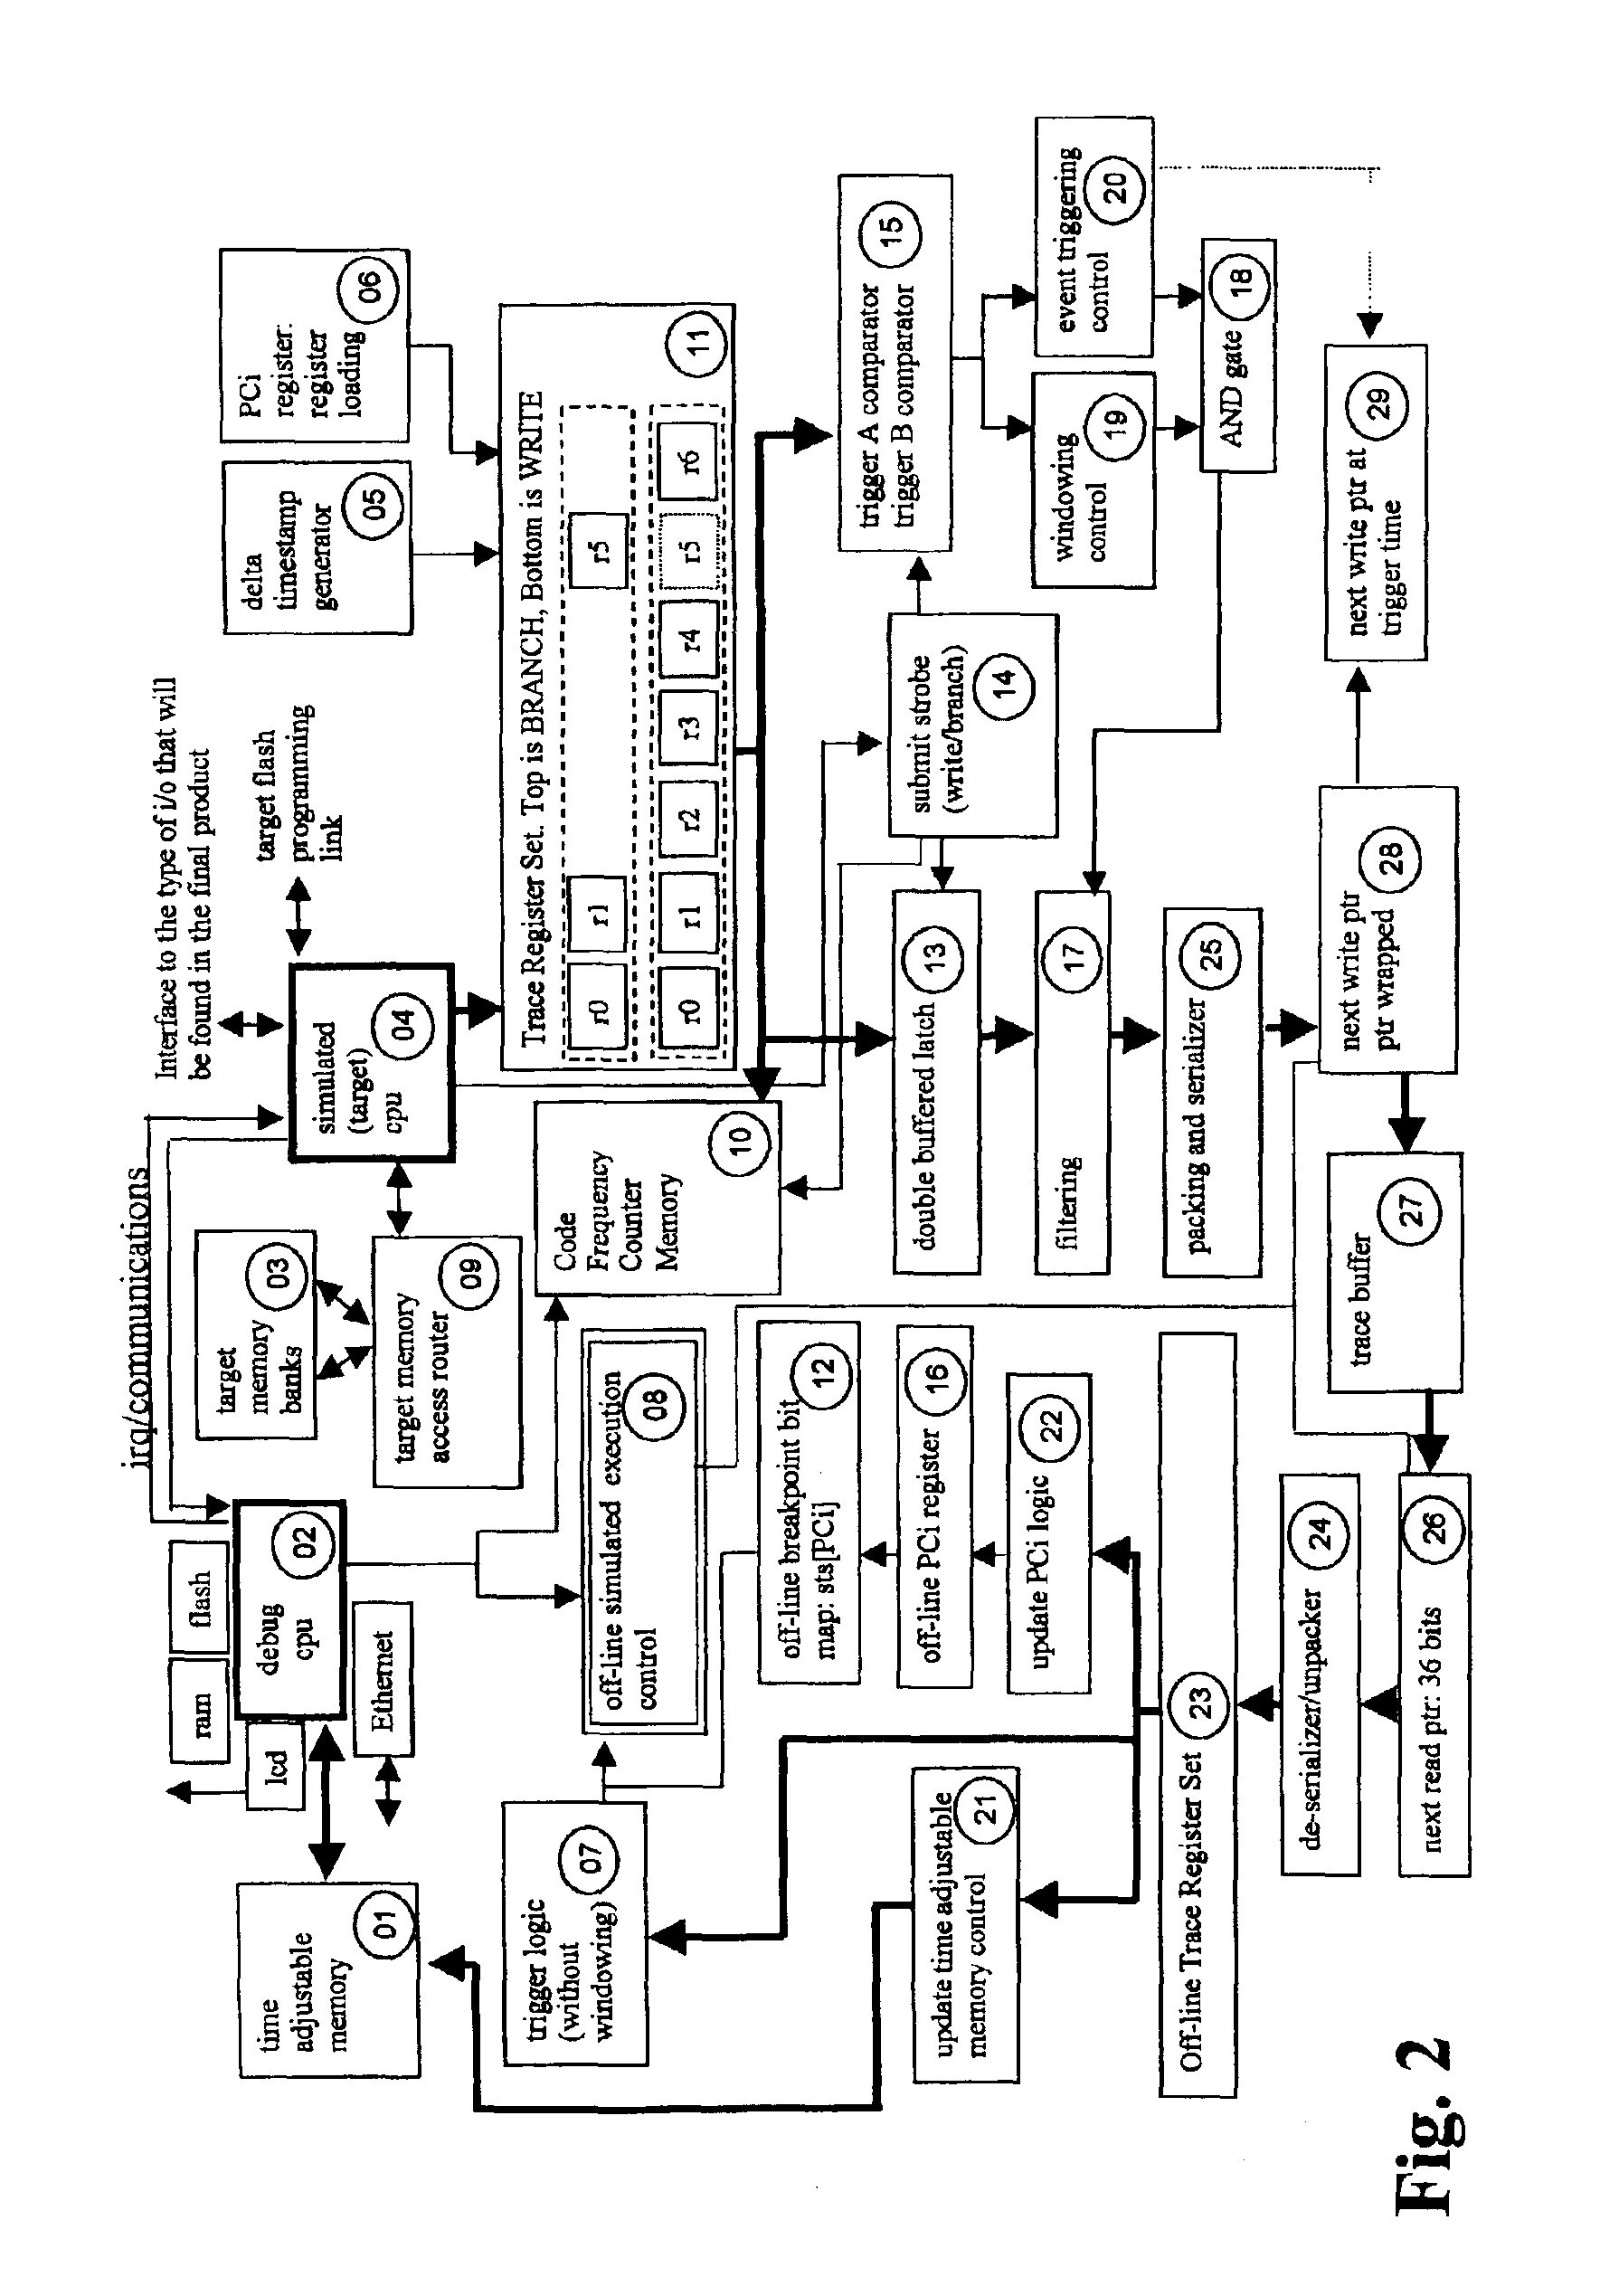 Method for software debugging via simulated re-execution of a computer program